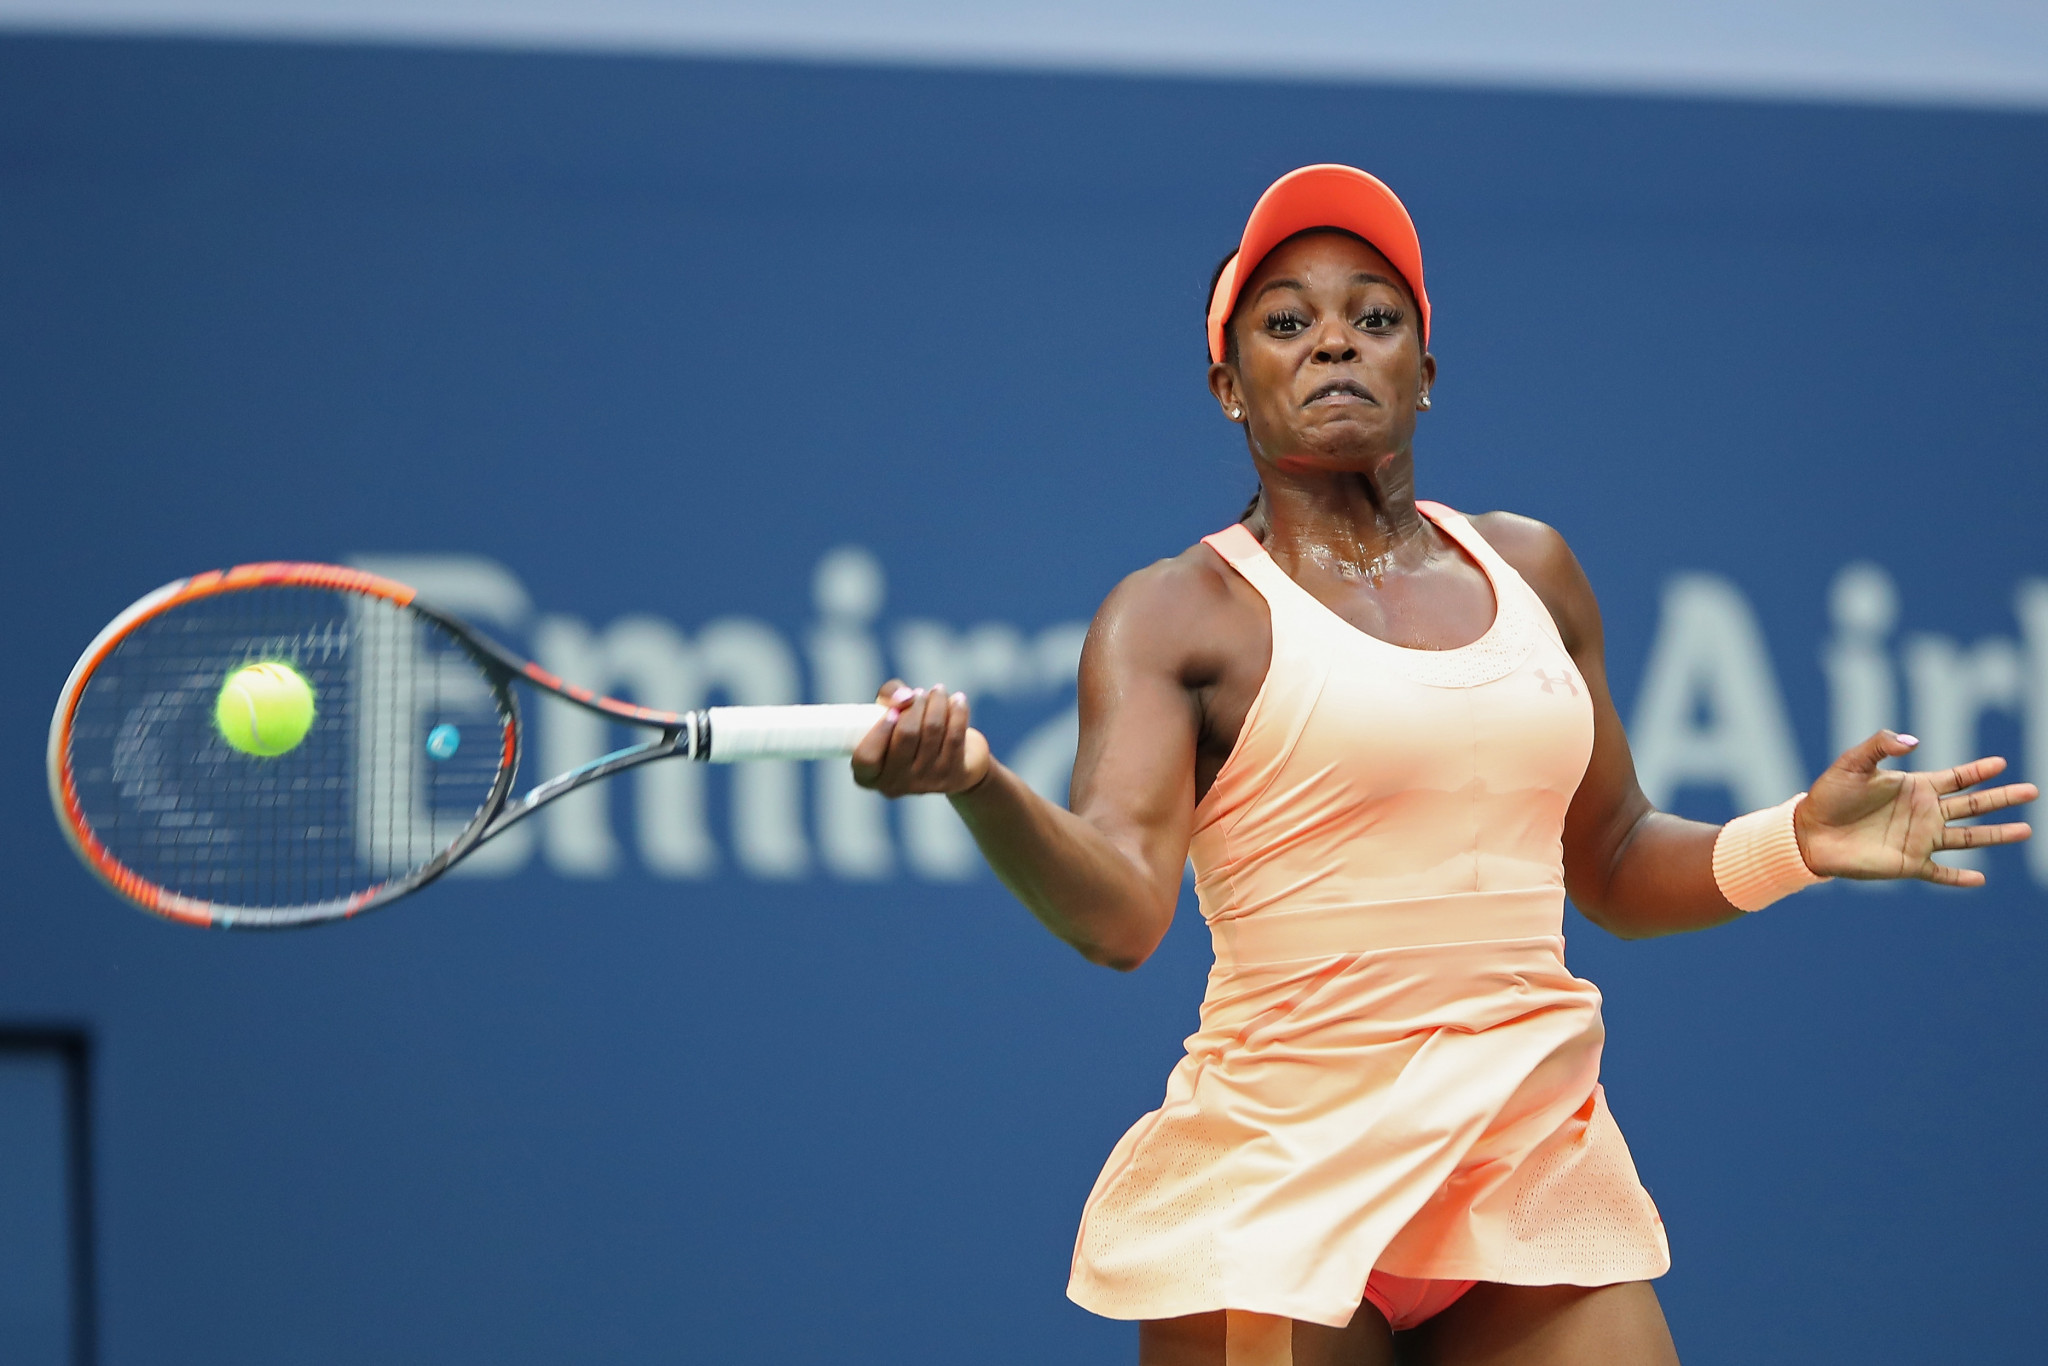 Sloane Stephens, pictured, claimed a 6-3, 6-0 victory over Madison Keys in an all-American final ©Getty Images